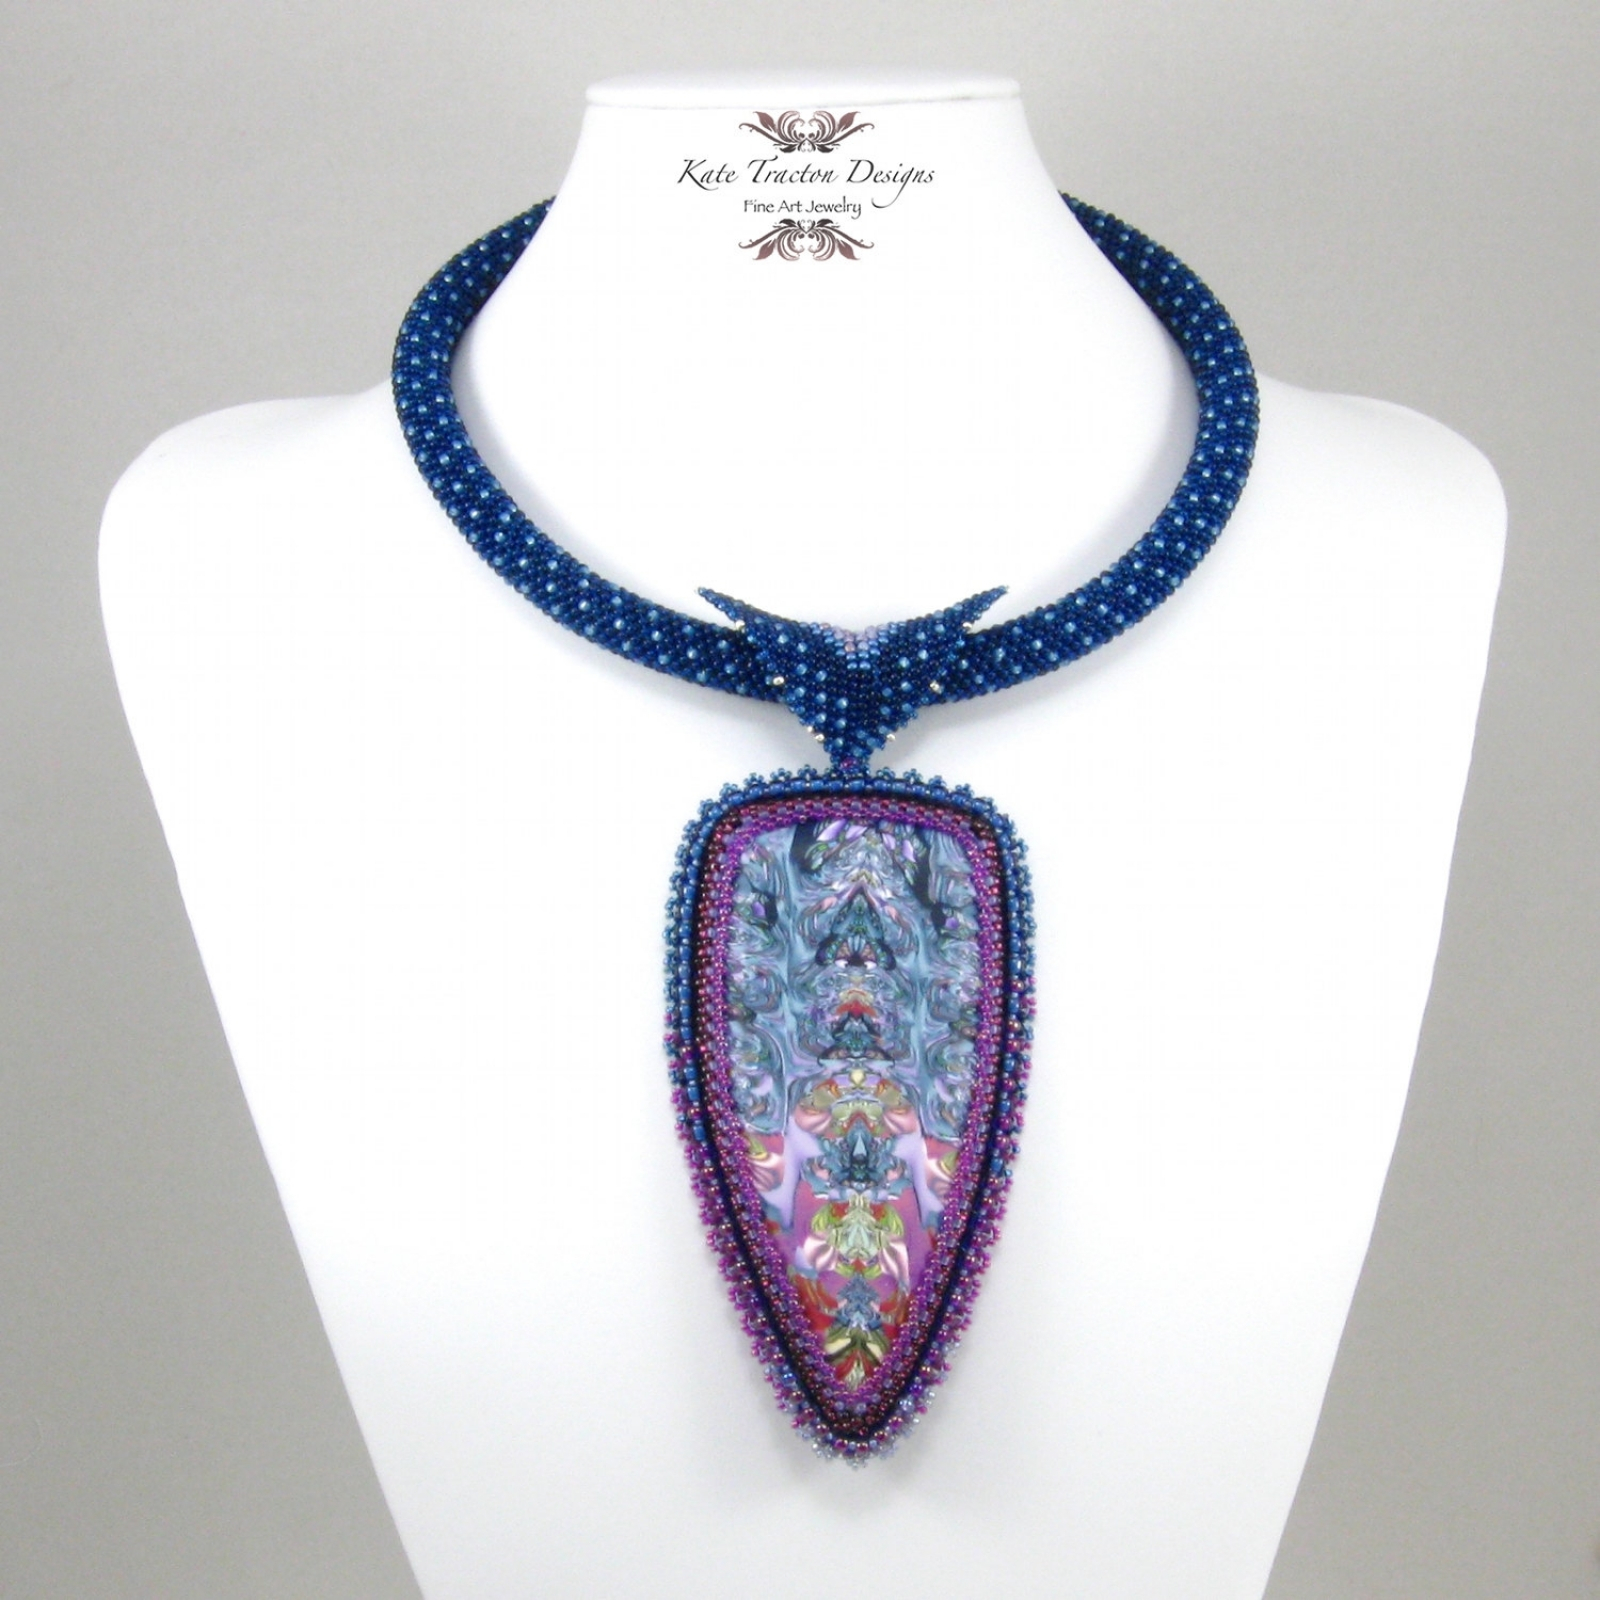 Bead Embroidery Jewelry Patterns Twilight Descends Necklace Polymer Clay Beadweaving Bead Embroidery